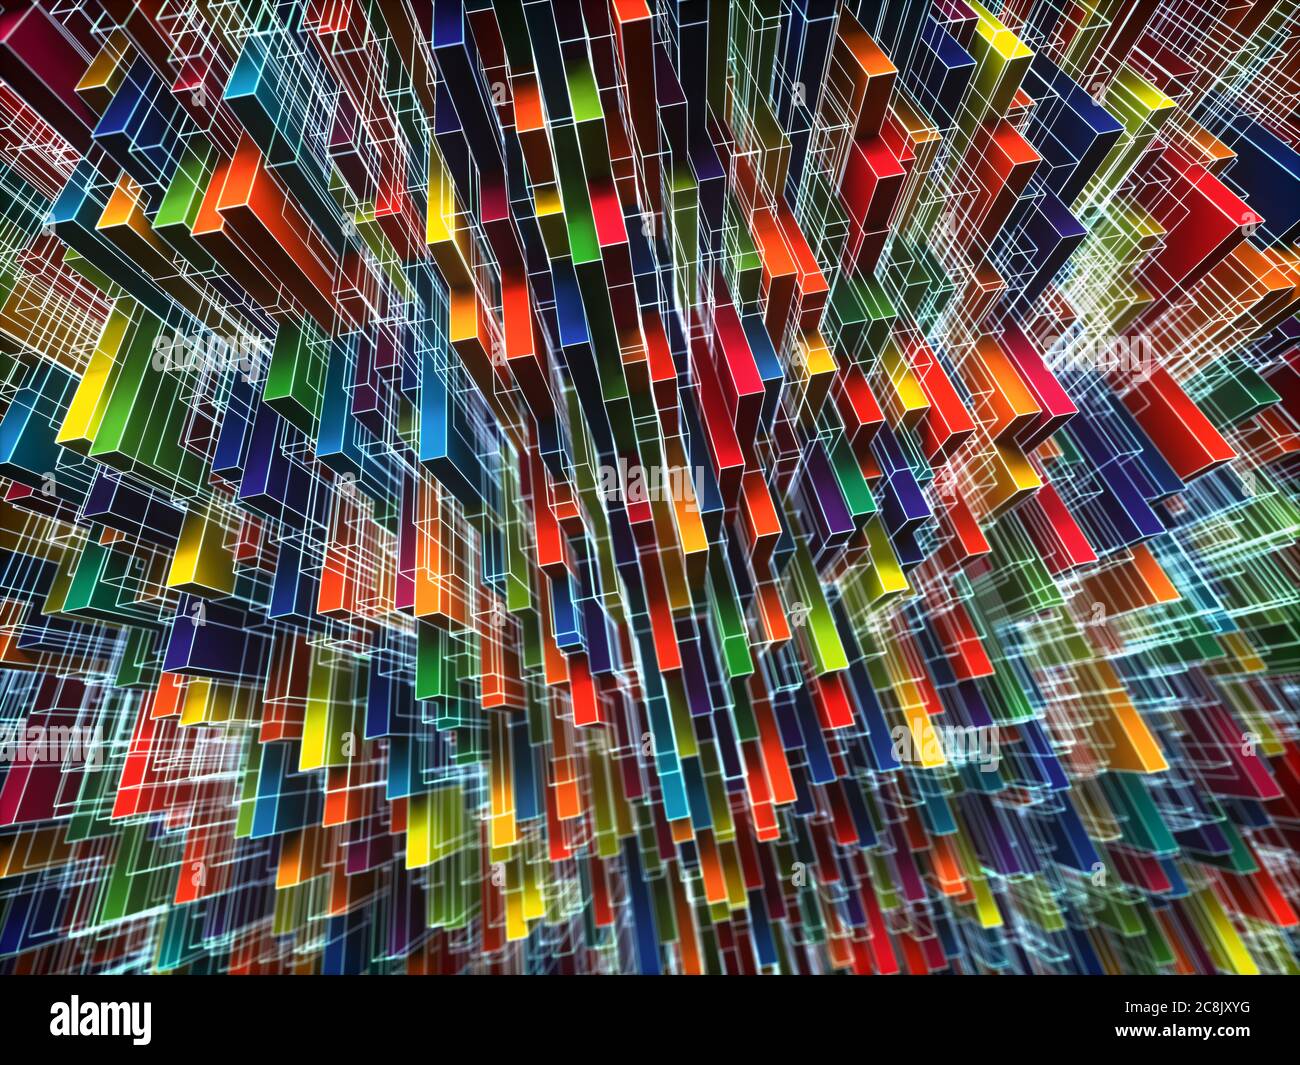 Abstract and colorful background image. Geometric shapes and lines scattered randomly in concept of complexity. 3D illustration. Stock Photo